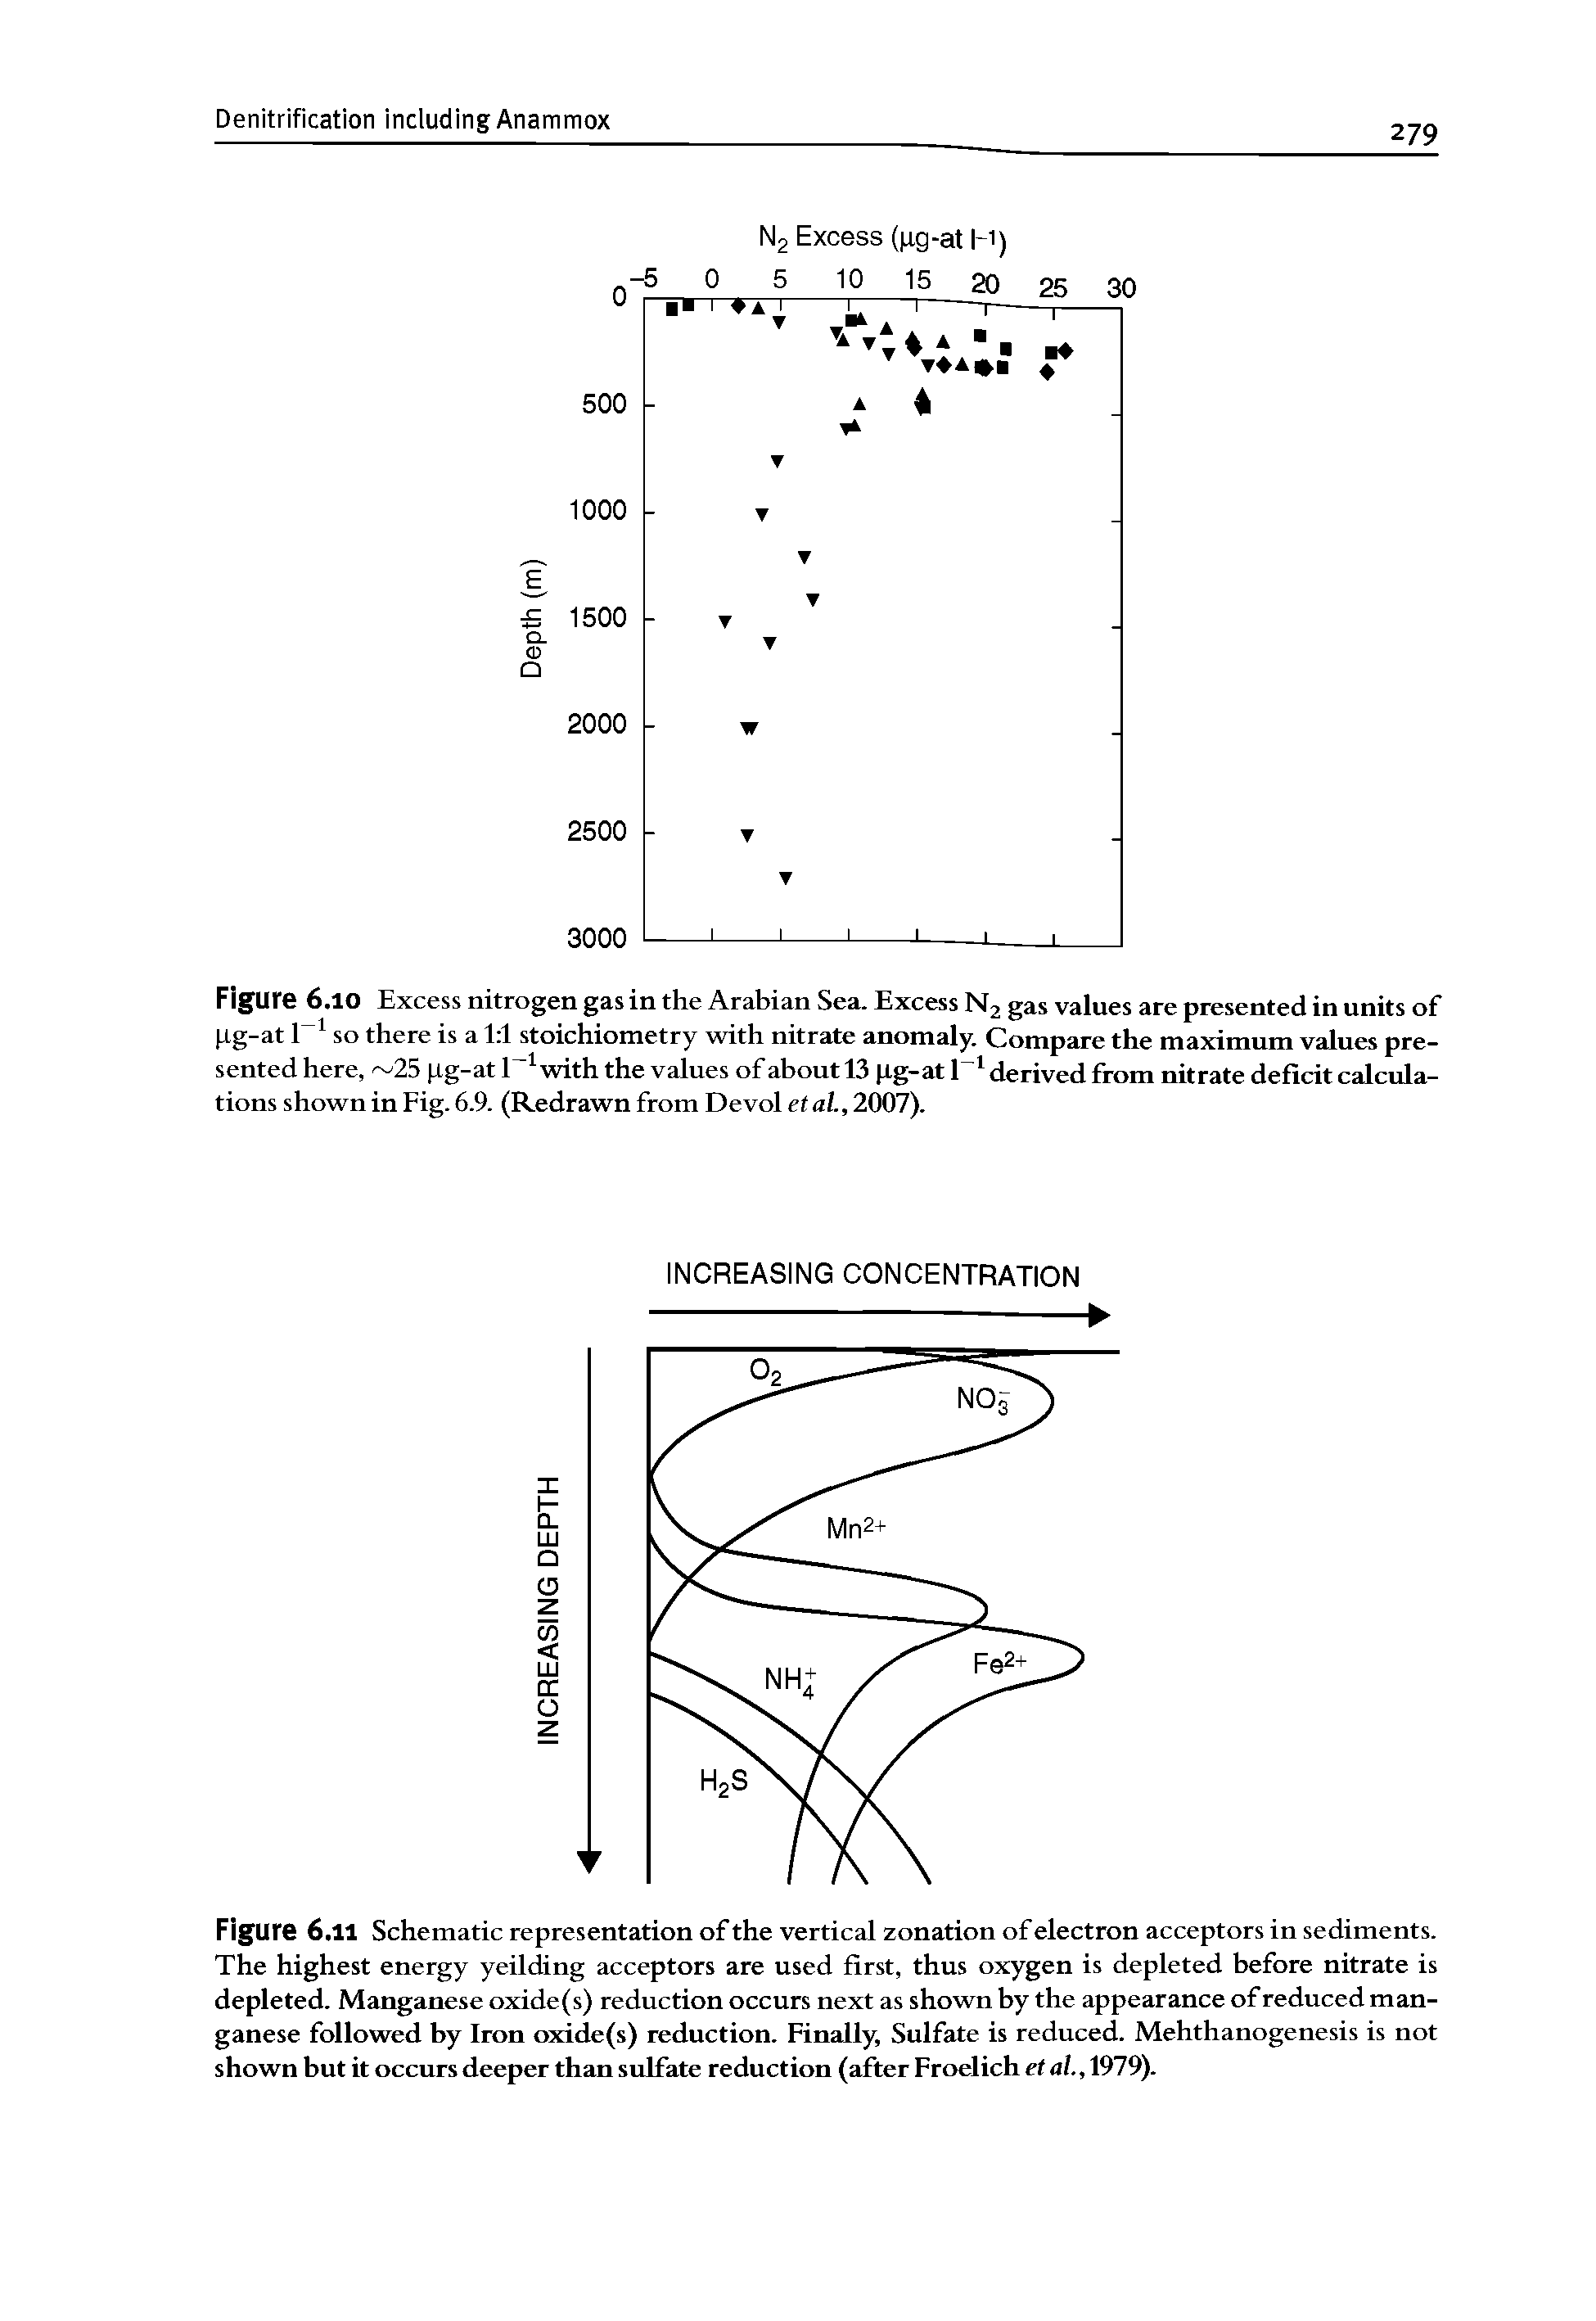 Figure 6.10 Excess nitrogen gas in the Arabian Sea. Excess Nj gas values are presented in units of pg-at 1 so there is a 1 1 stoichiometry with nitrate anomaly. Compare the maximum values presented here, 25 pg-at with the values of about 13 pg-at derived from nitrate deficit calculations shown in Fig. 6.9. (Redrawn from Devol etal., 2007).